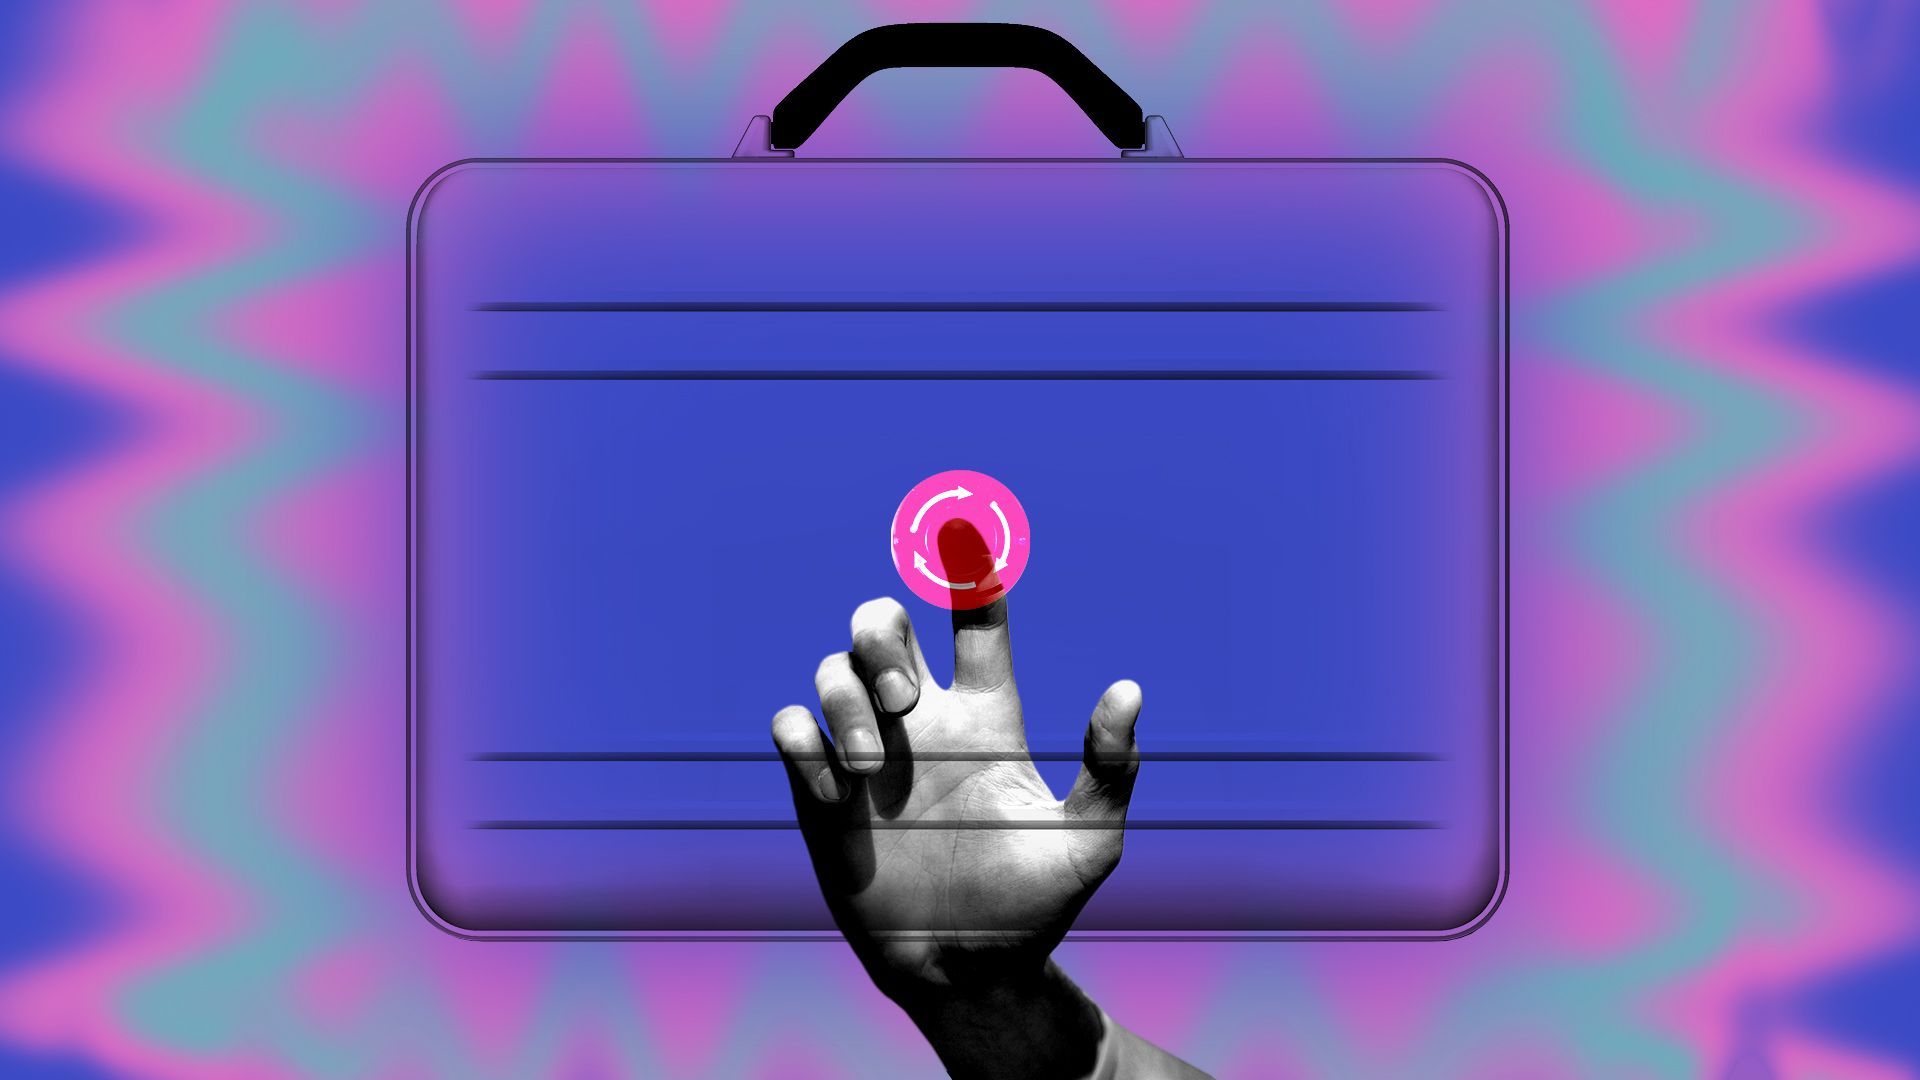 Illustration of a hand pressing a reset button on a briefcase